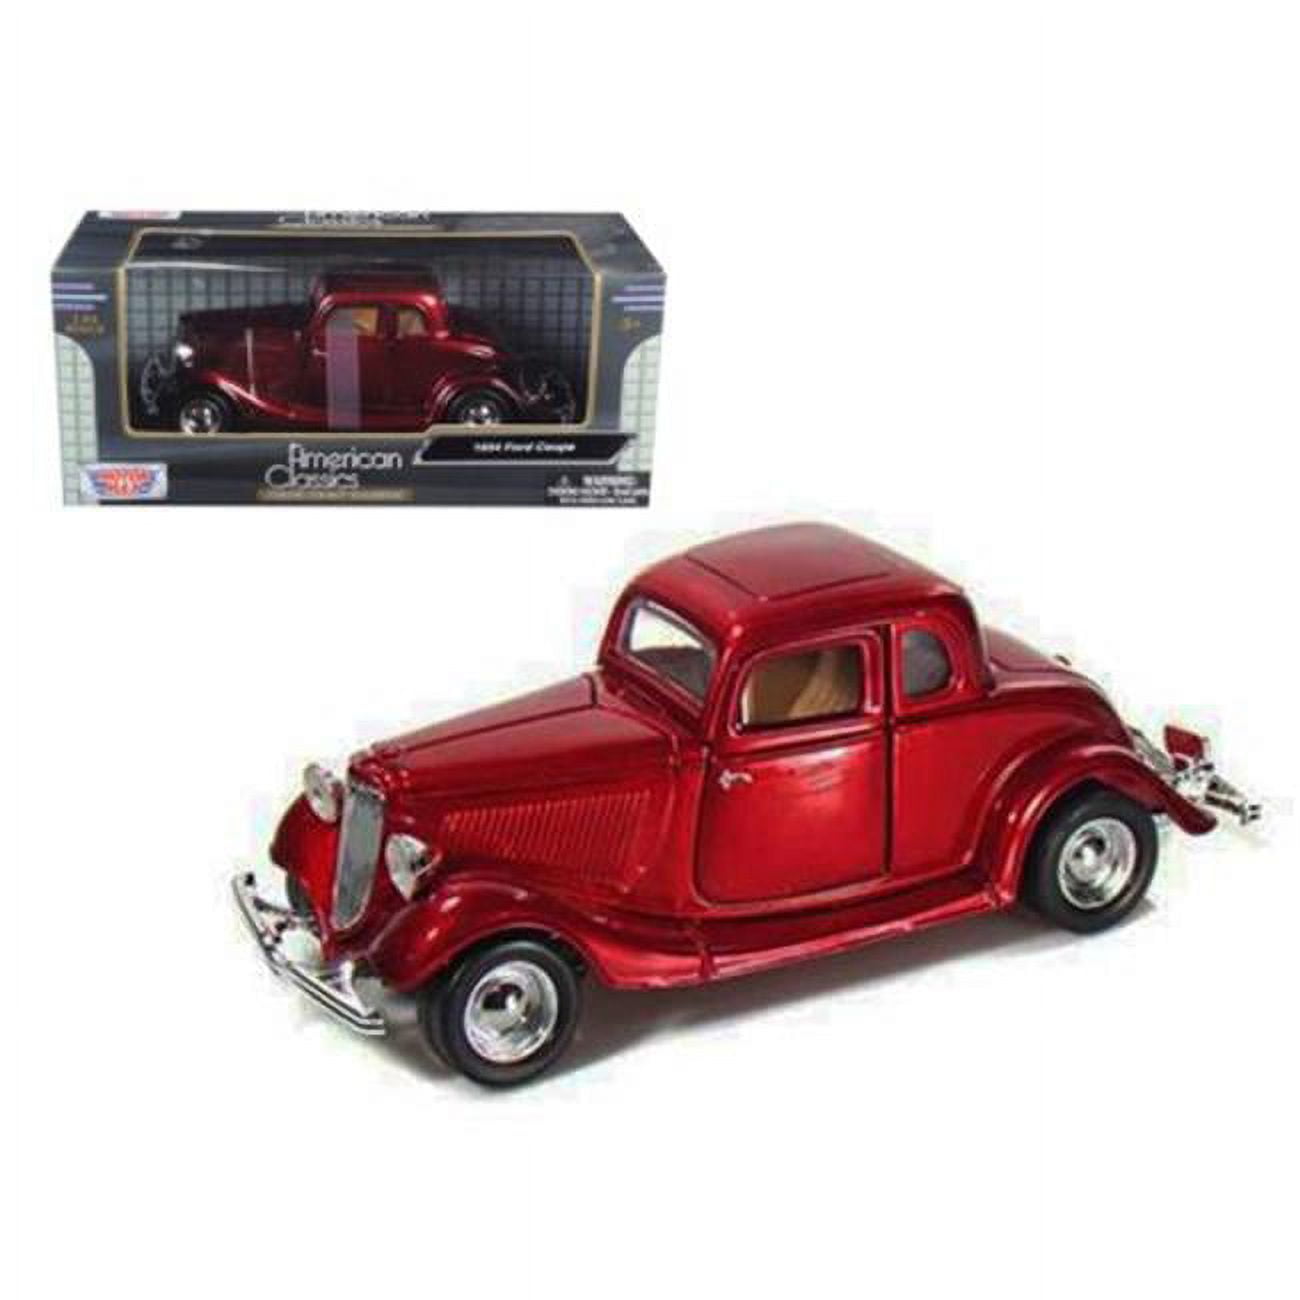 1934 Ford Coupe Model Car, Red -  Play4Hours, PL994512